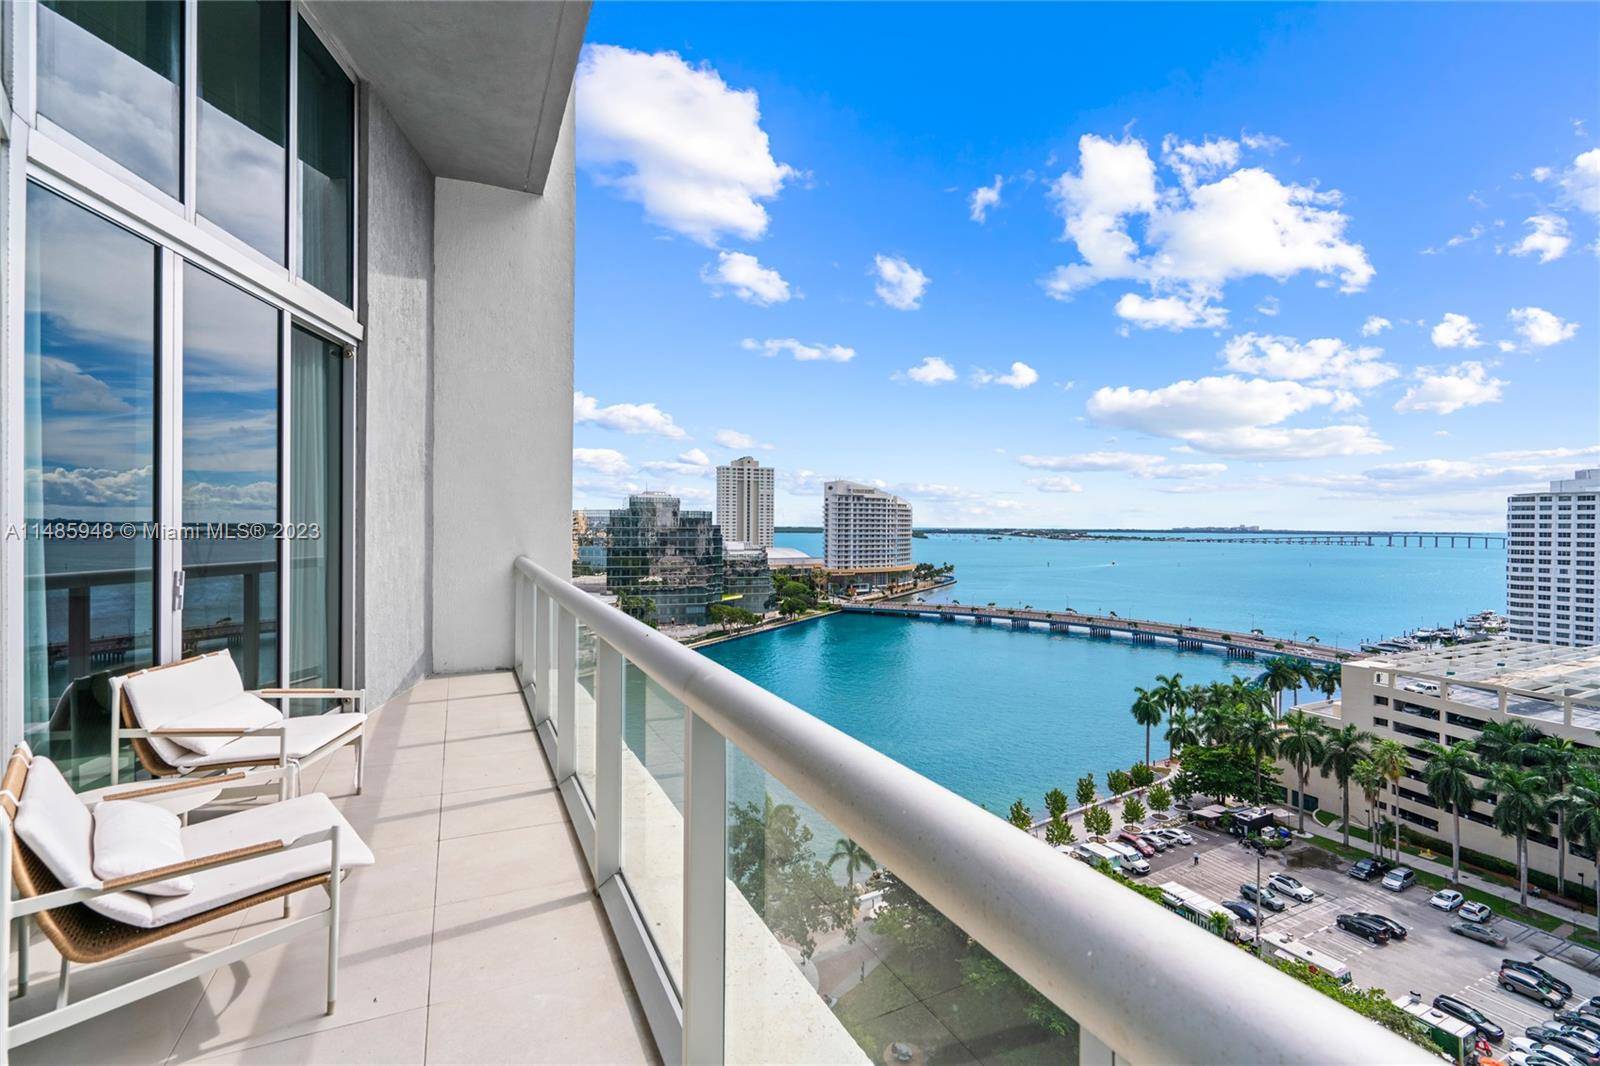 Most desirable, High ceiling 1 Bed 1 Bath Available For Rent in Icon Brickell, Tower II Tastefully furnished well equipped.